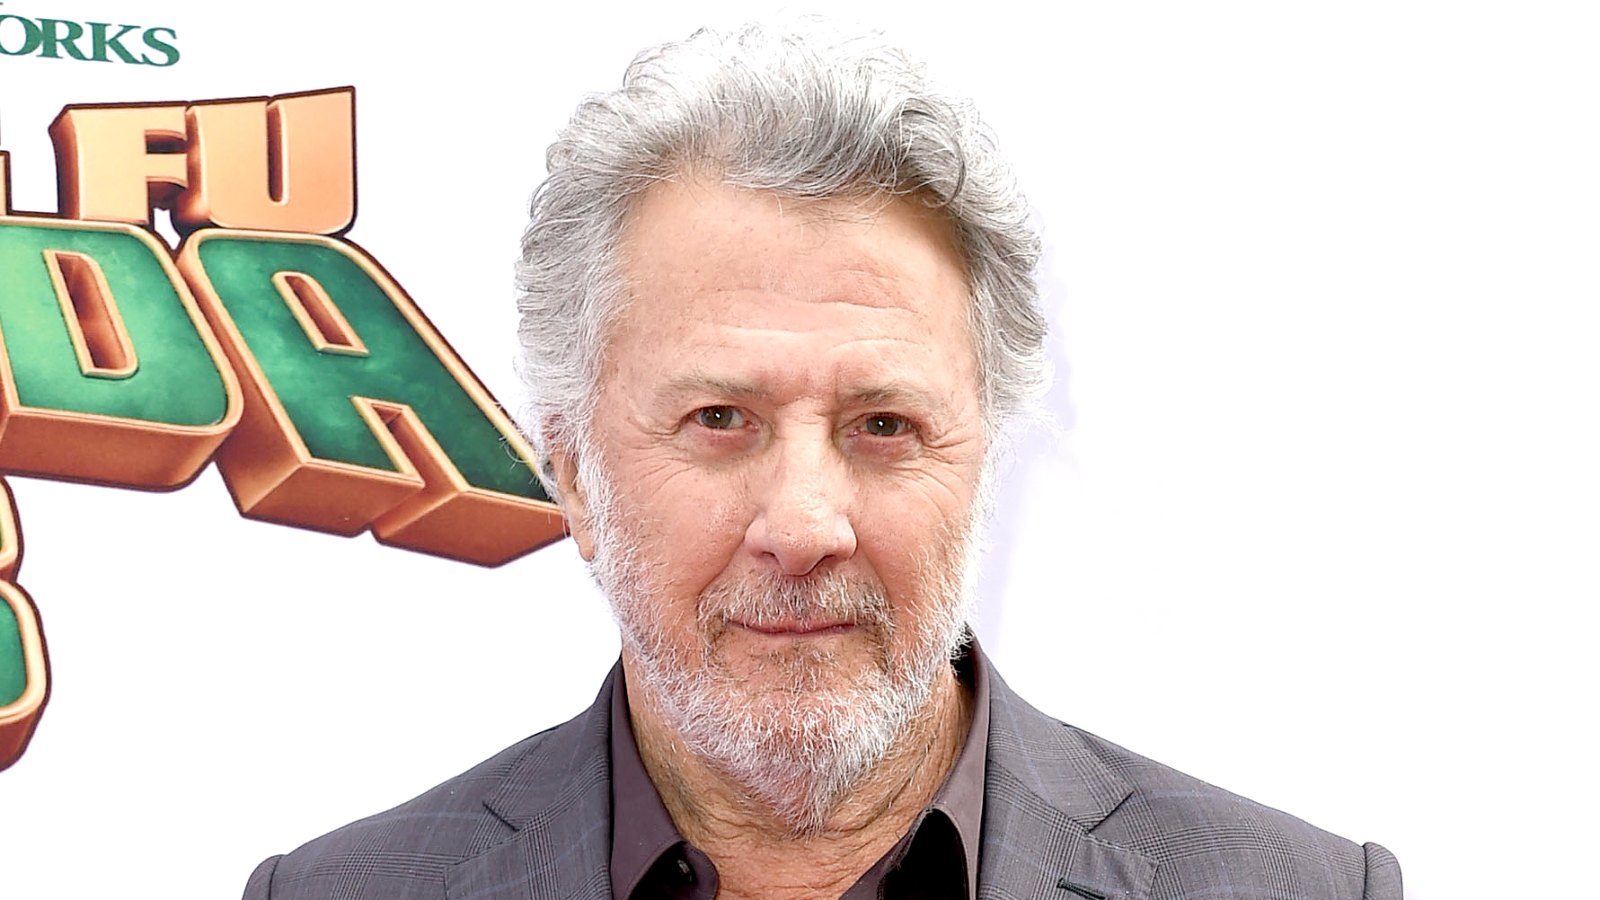 Dustin-Hoffman-Accused-of-Sexually-Harassing-Former-Intern